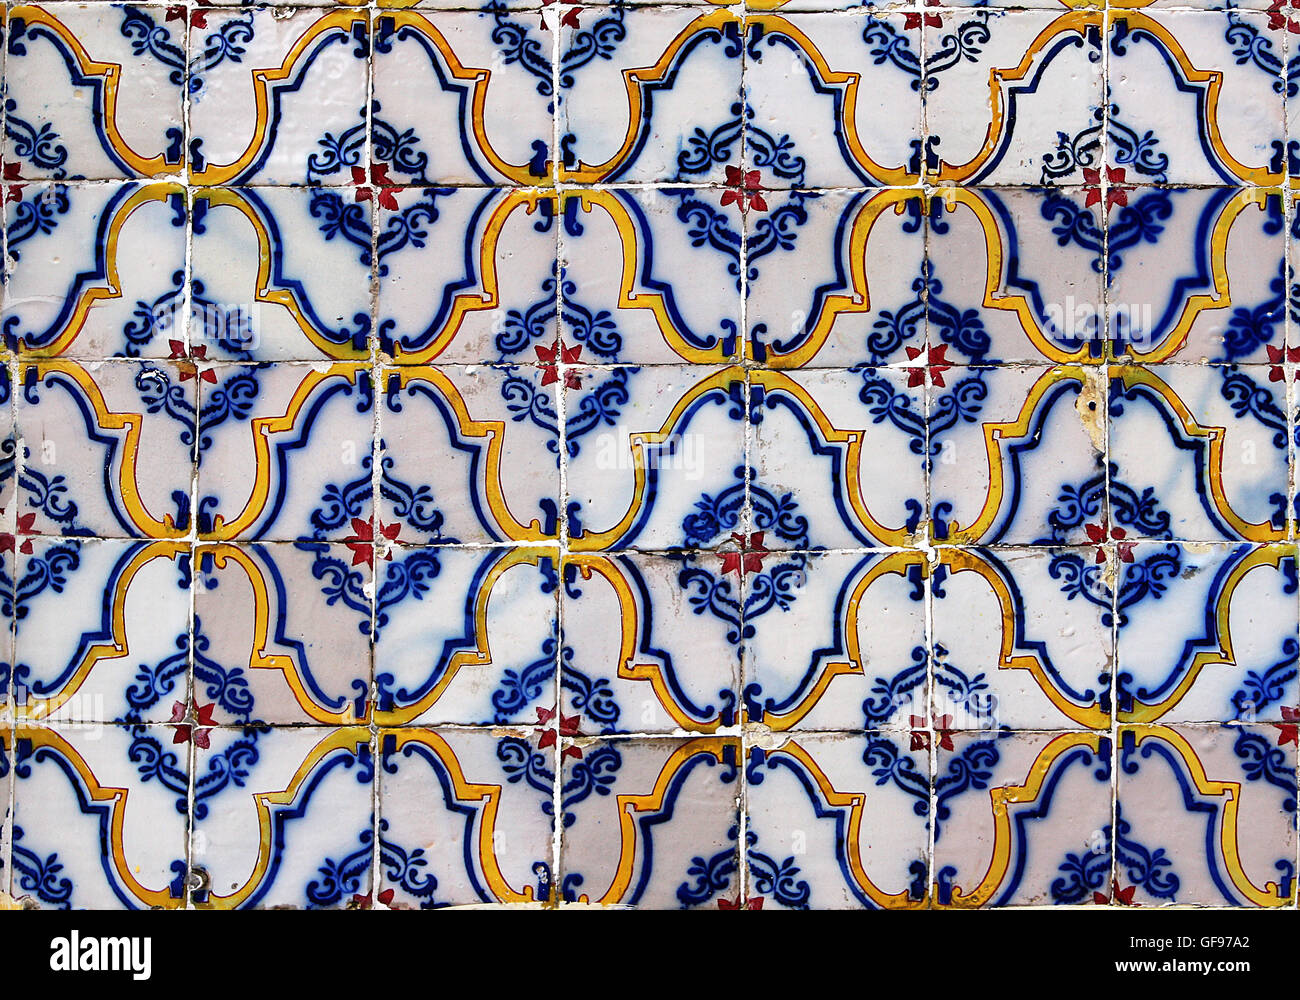 Seamless tile pattern of anyique tiles. This is seamless pattern, meaning you can create an arbitrary image size by simply conca Stock Photo